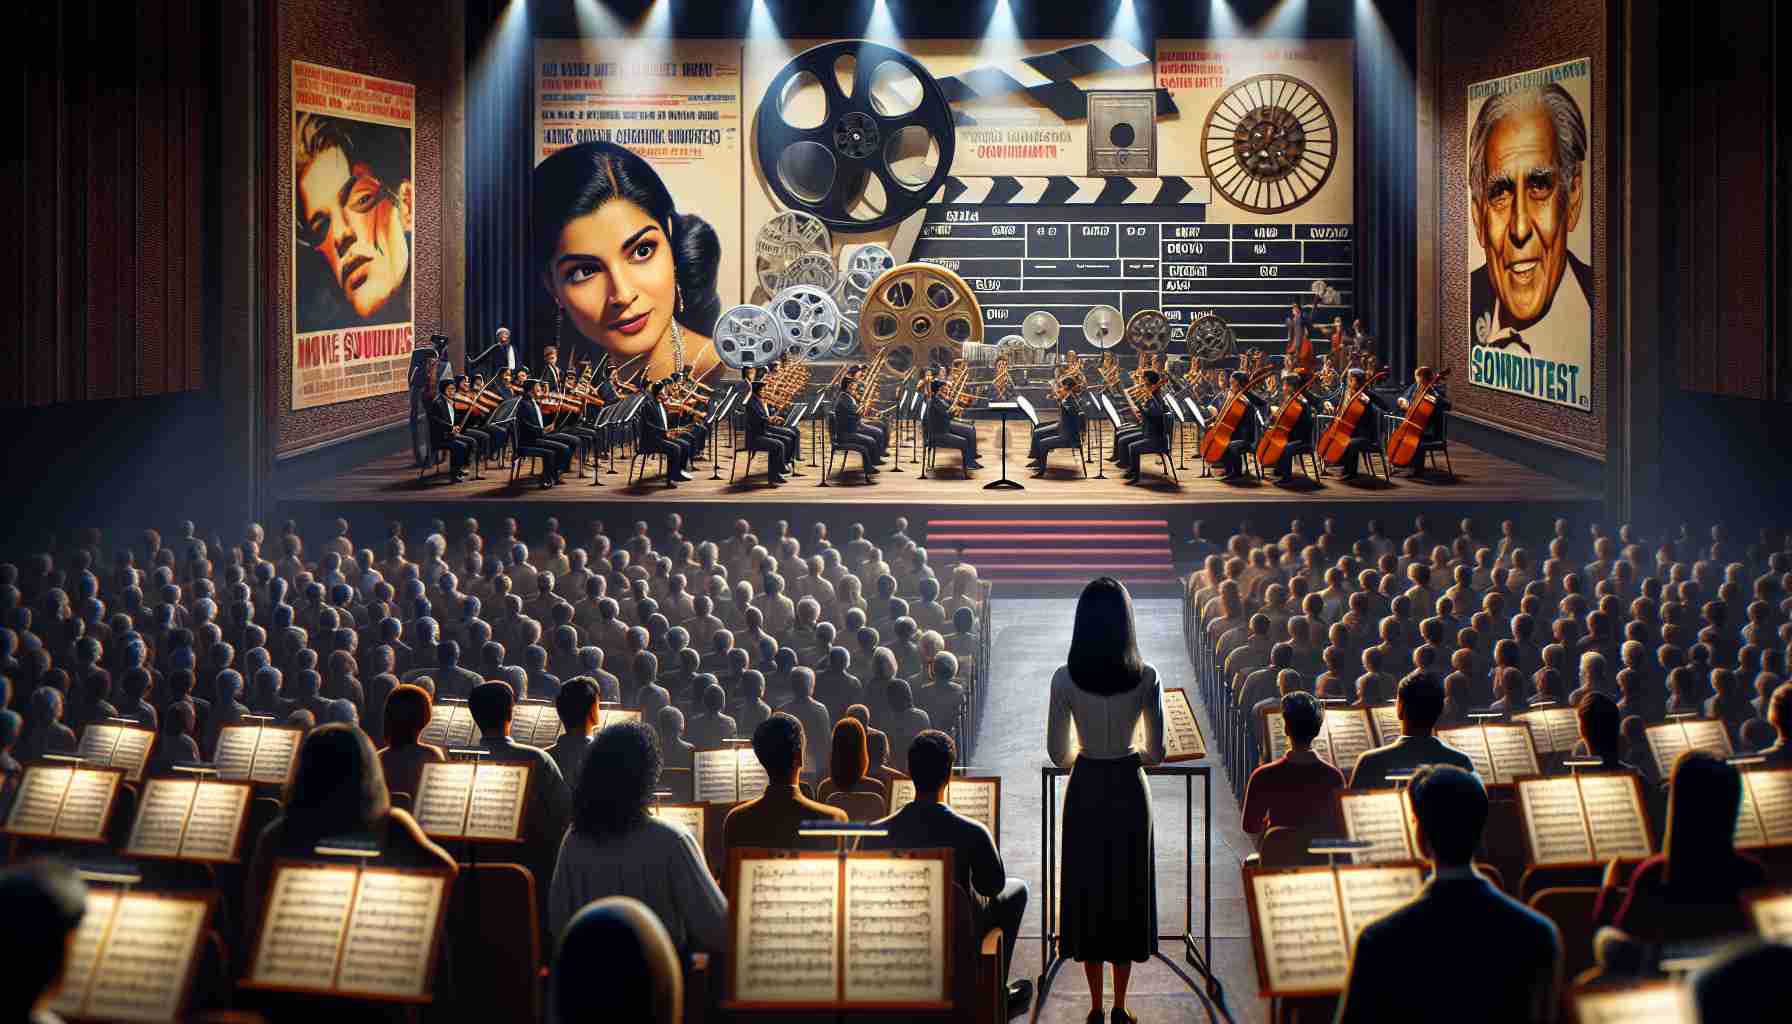 Create an image showcasing a new musical event focusing on movie soundtracks. Depict a diverse crowd of people eagerly waiting for the event to kick off. The stage should be elaborately decorated to reflect the theme of movie soundtracks, with reel films, clapperboards, and musical notes adorning it. Posters of old-time iconic films should be visible in the backdrop. The lighting should be dramatic, enhancing the realistic and HD quality of the image. In the foreground, we should see a female South Asian conductor and a diverse band ready to entrance the crowd with their performance.